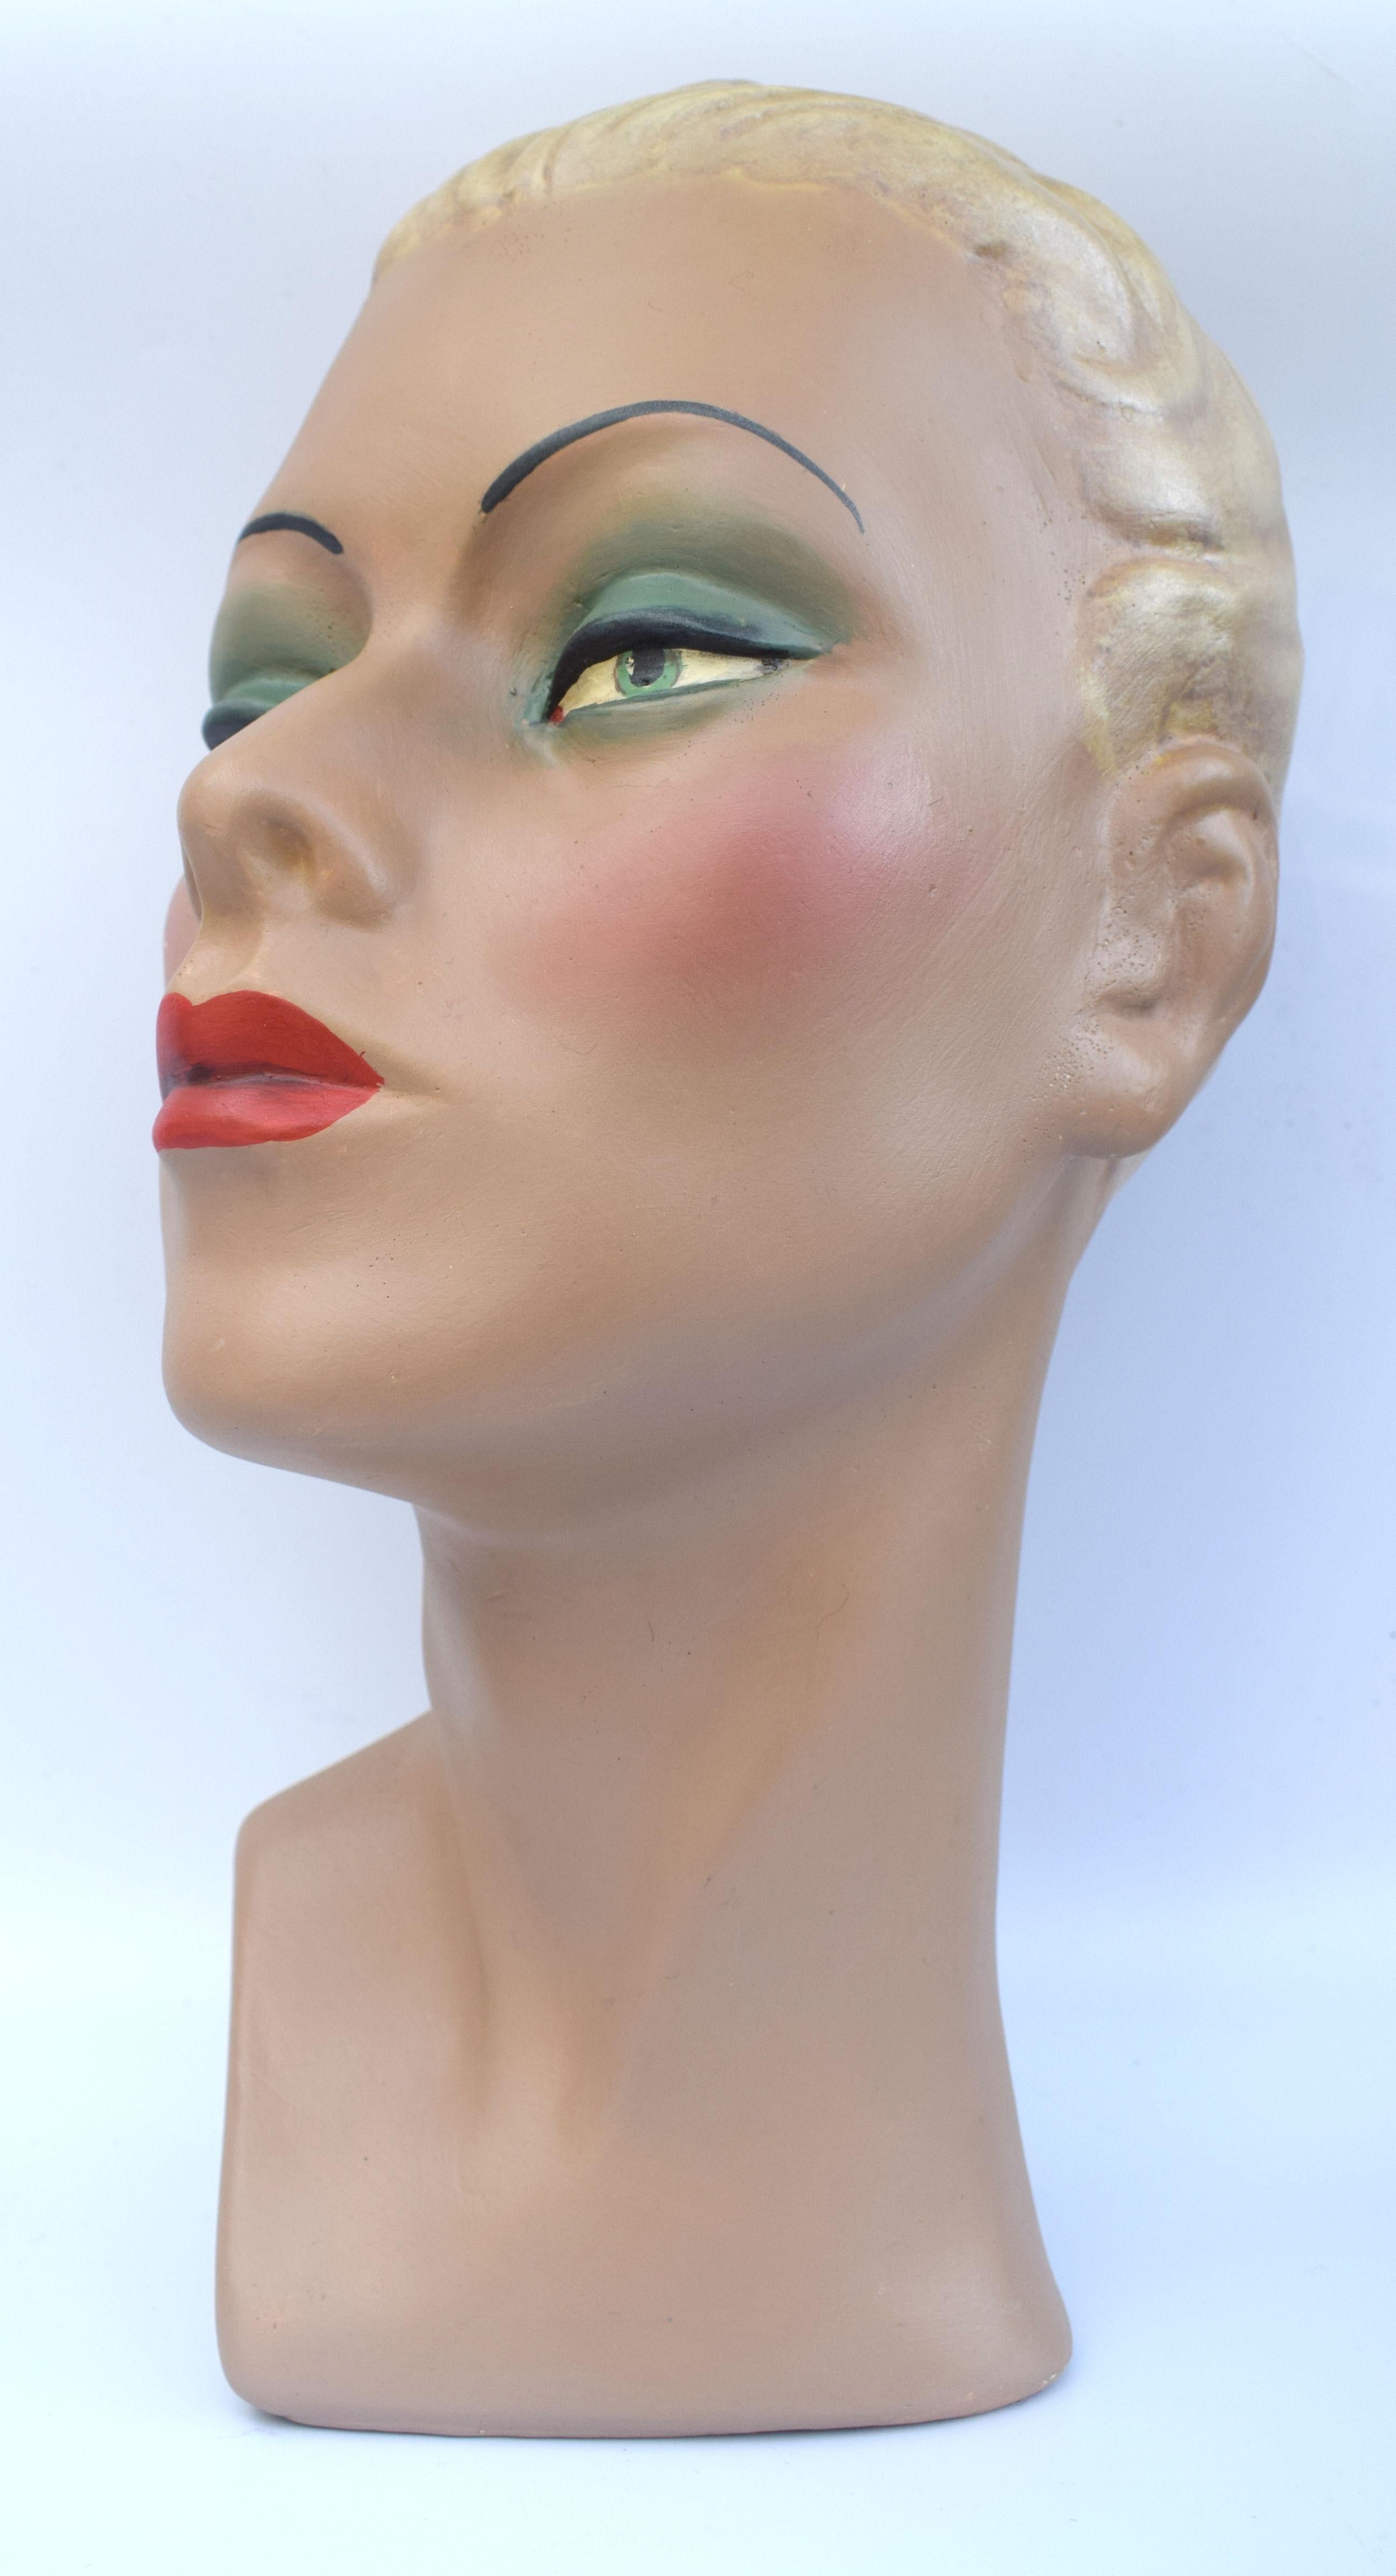 Fabulous Art Deco display female shop mannequin. She's in good vintage condition with the usual bumps and bruises one would expect but no serious damage. She's a great size and would be a wonderful asset to any collector or prop for a dealer /